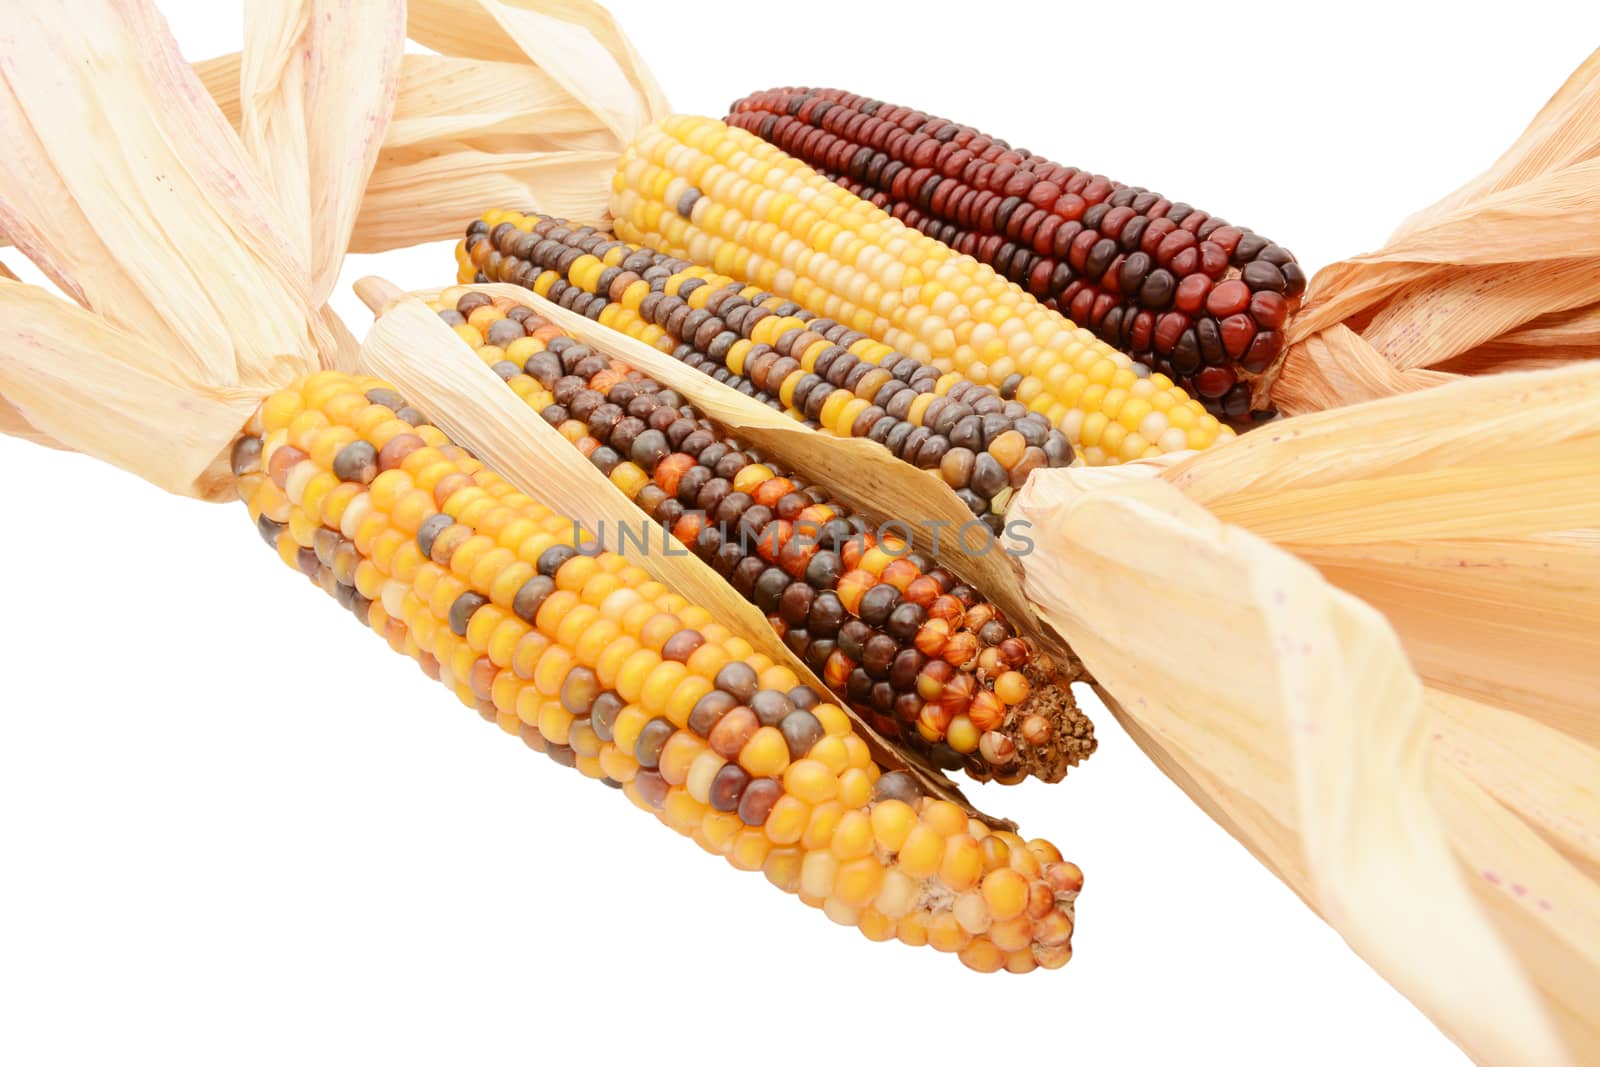 Five multicoloured ornamental flint corn cobs arranged diagonally, with red, yellow and brown niblets and dried maize husks, on a white background